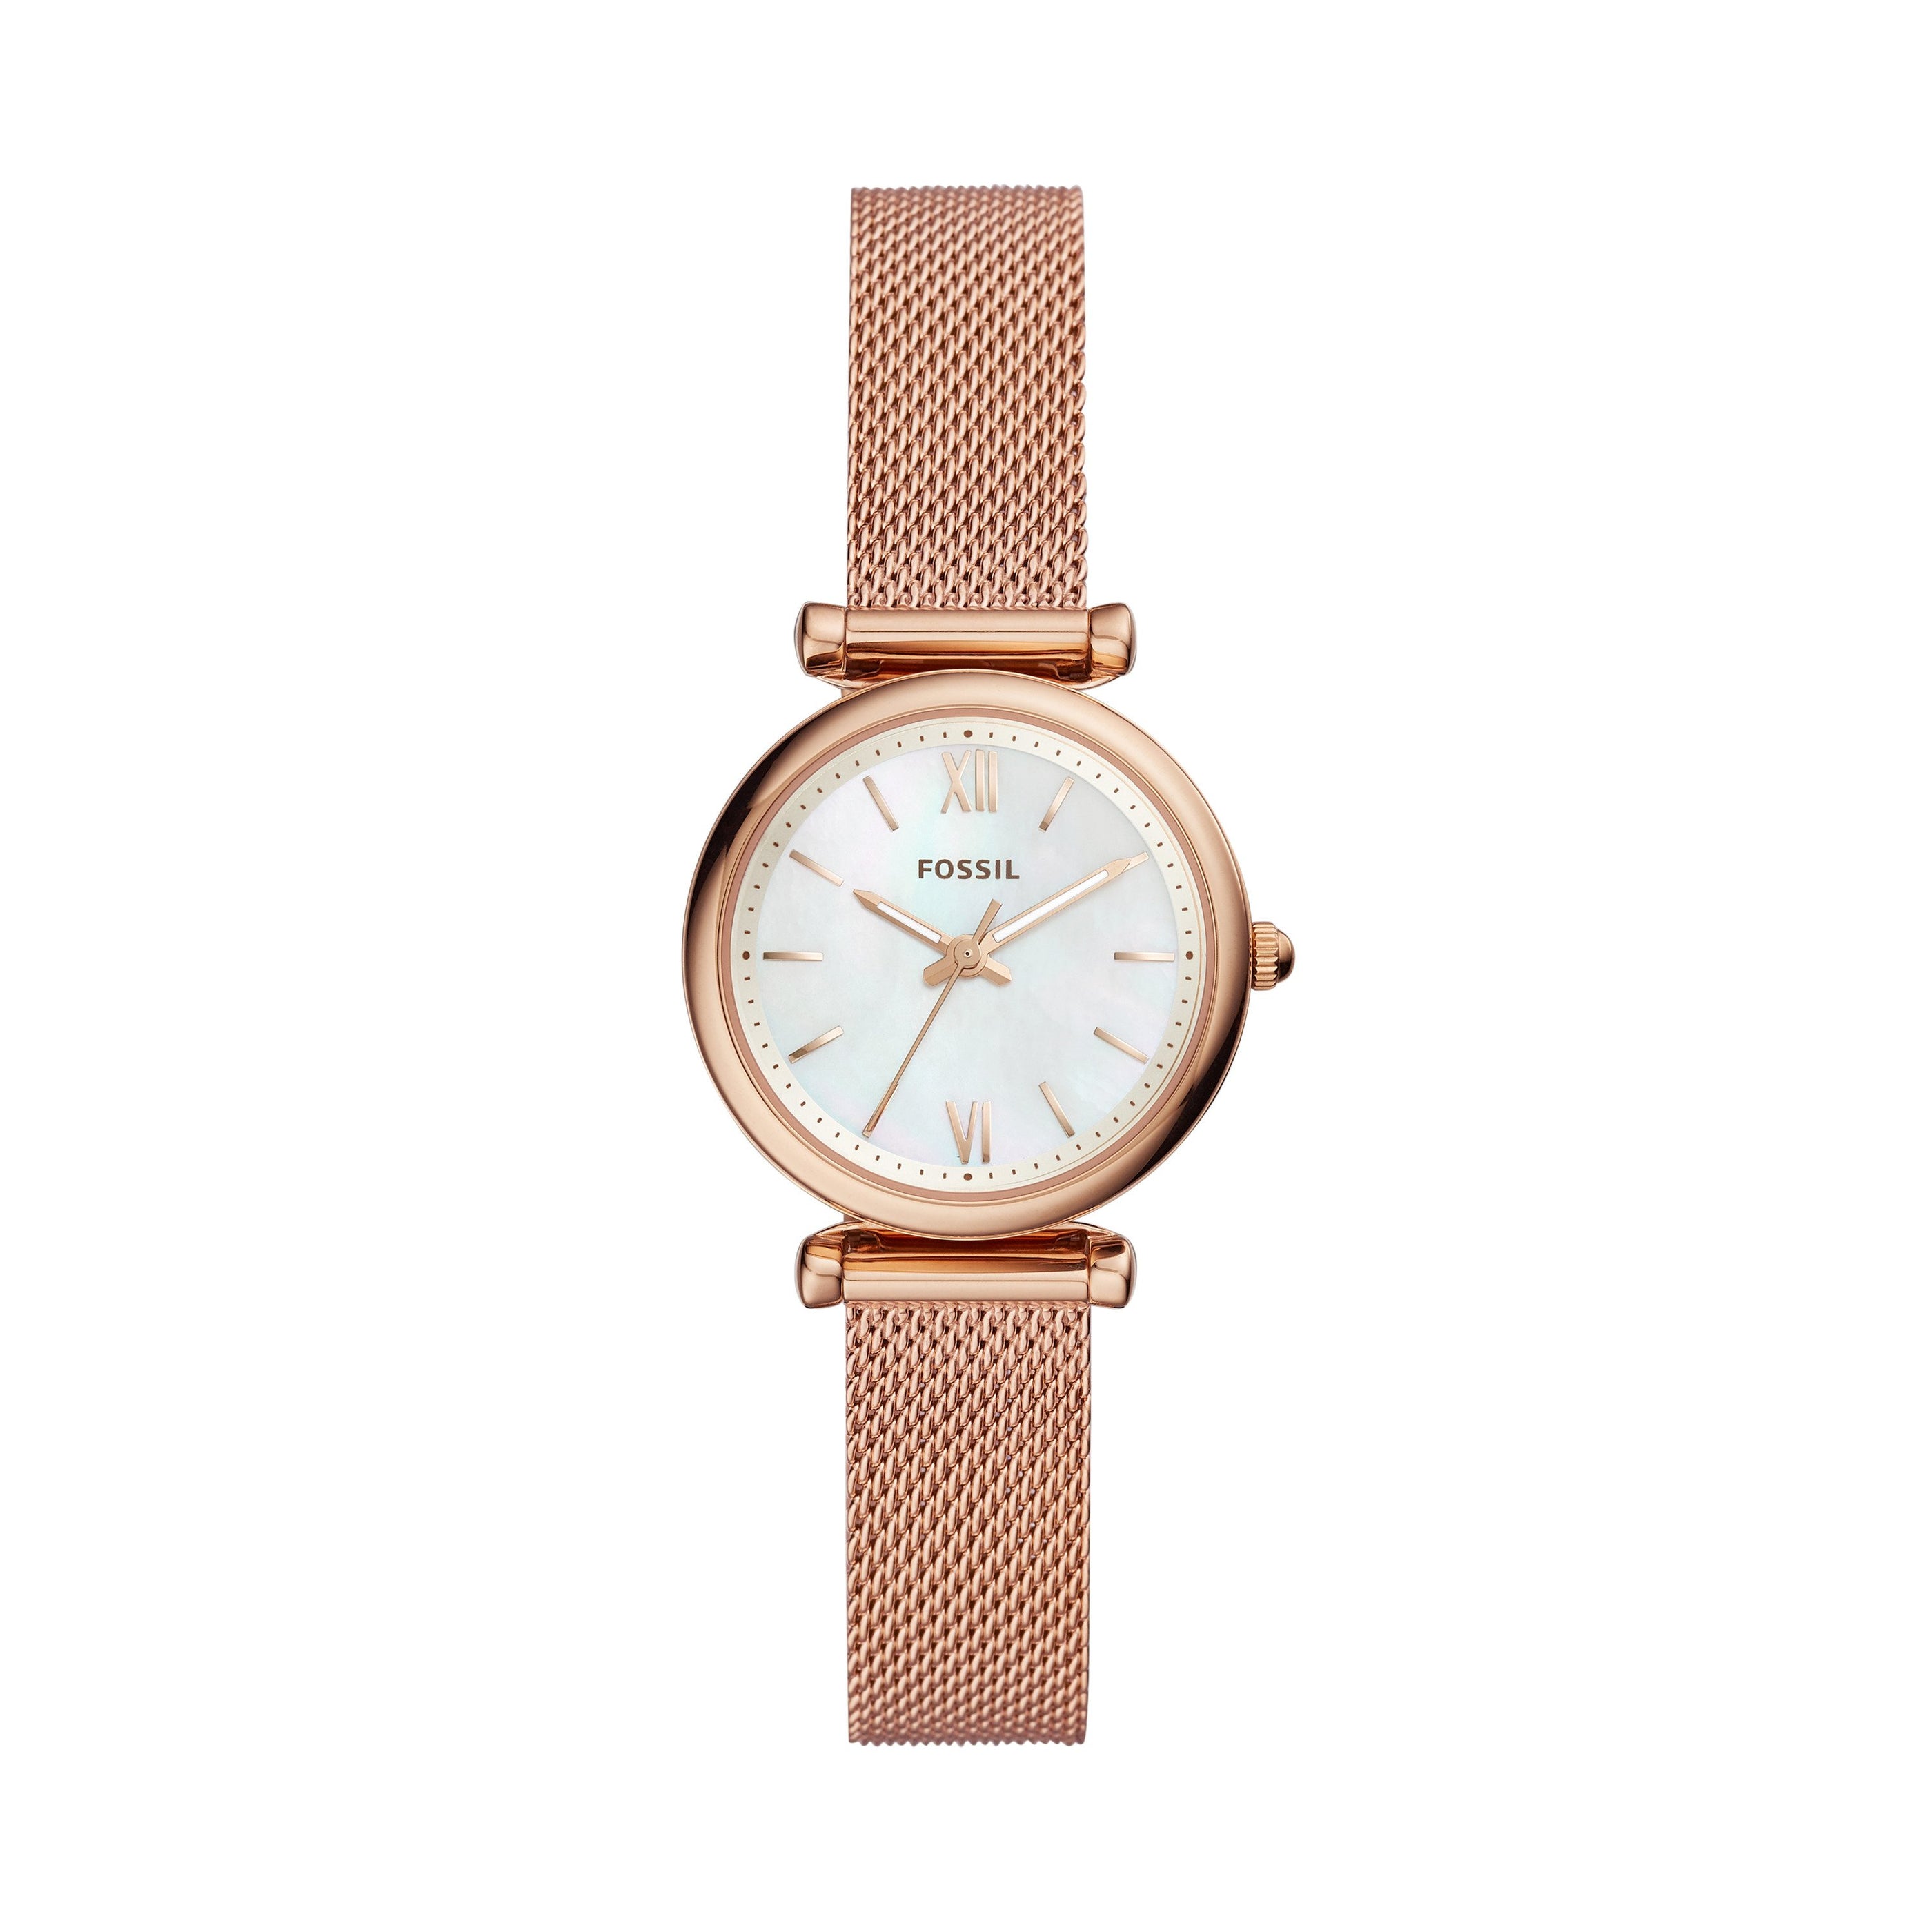 Fossil SM RD RG MOP BRC — Time After Time